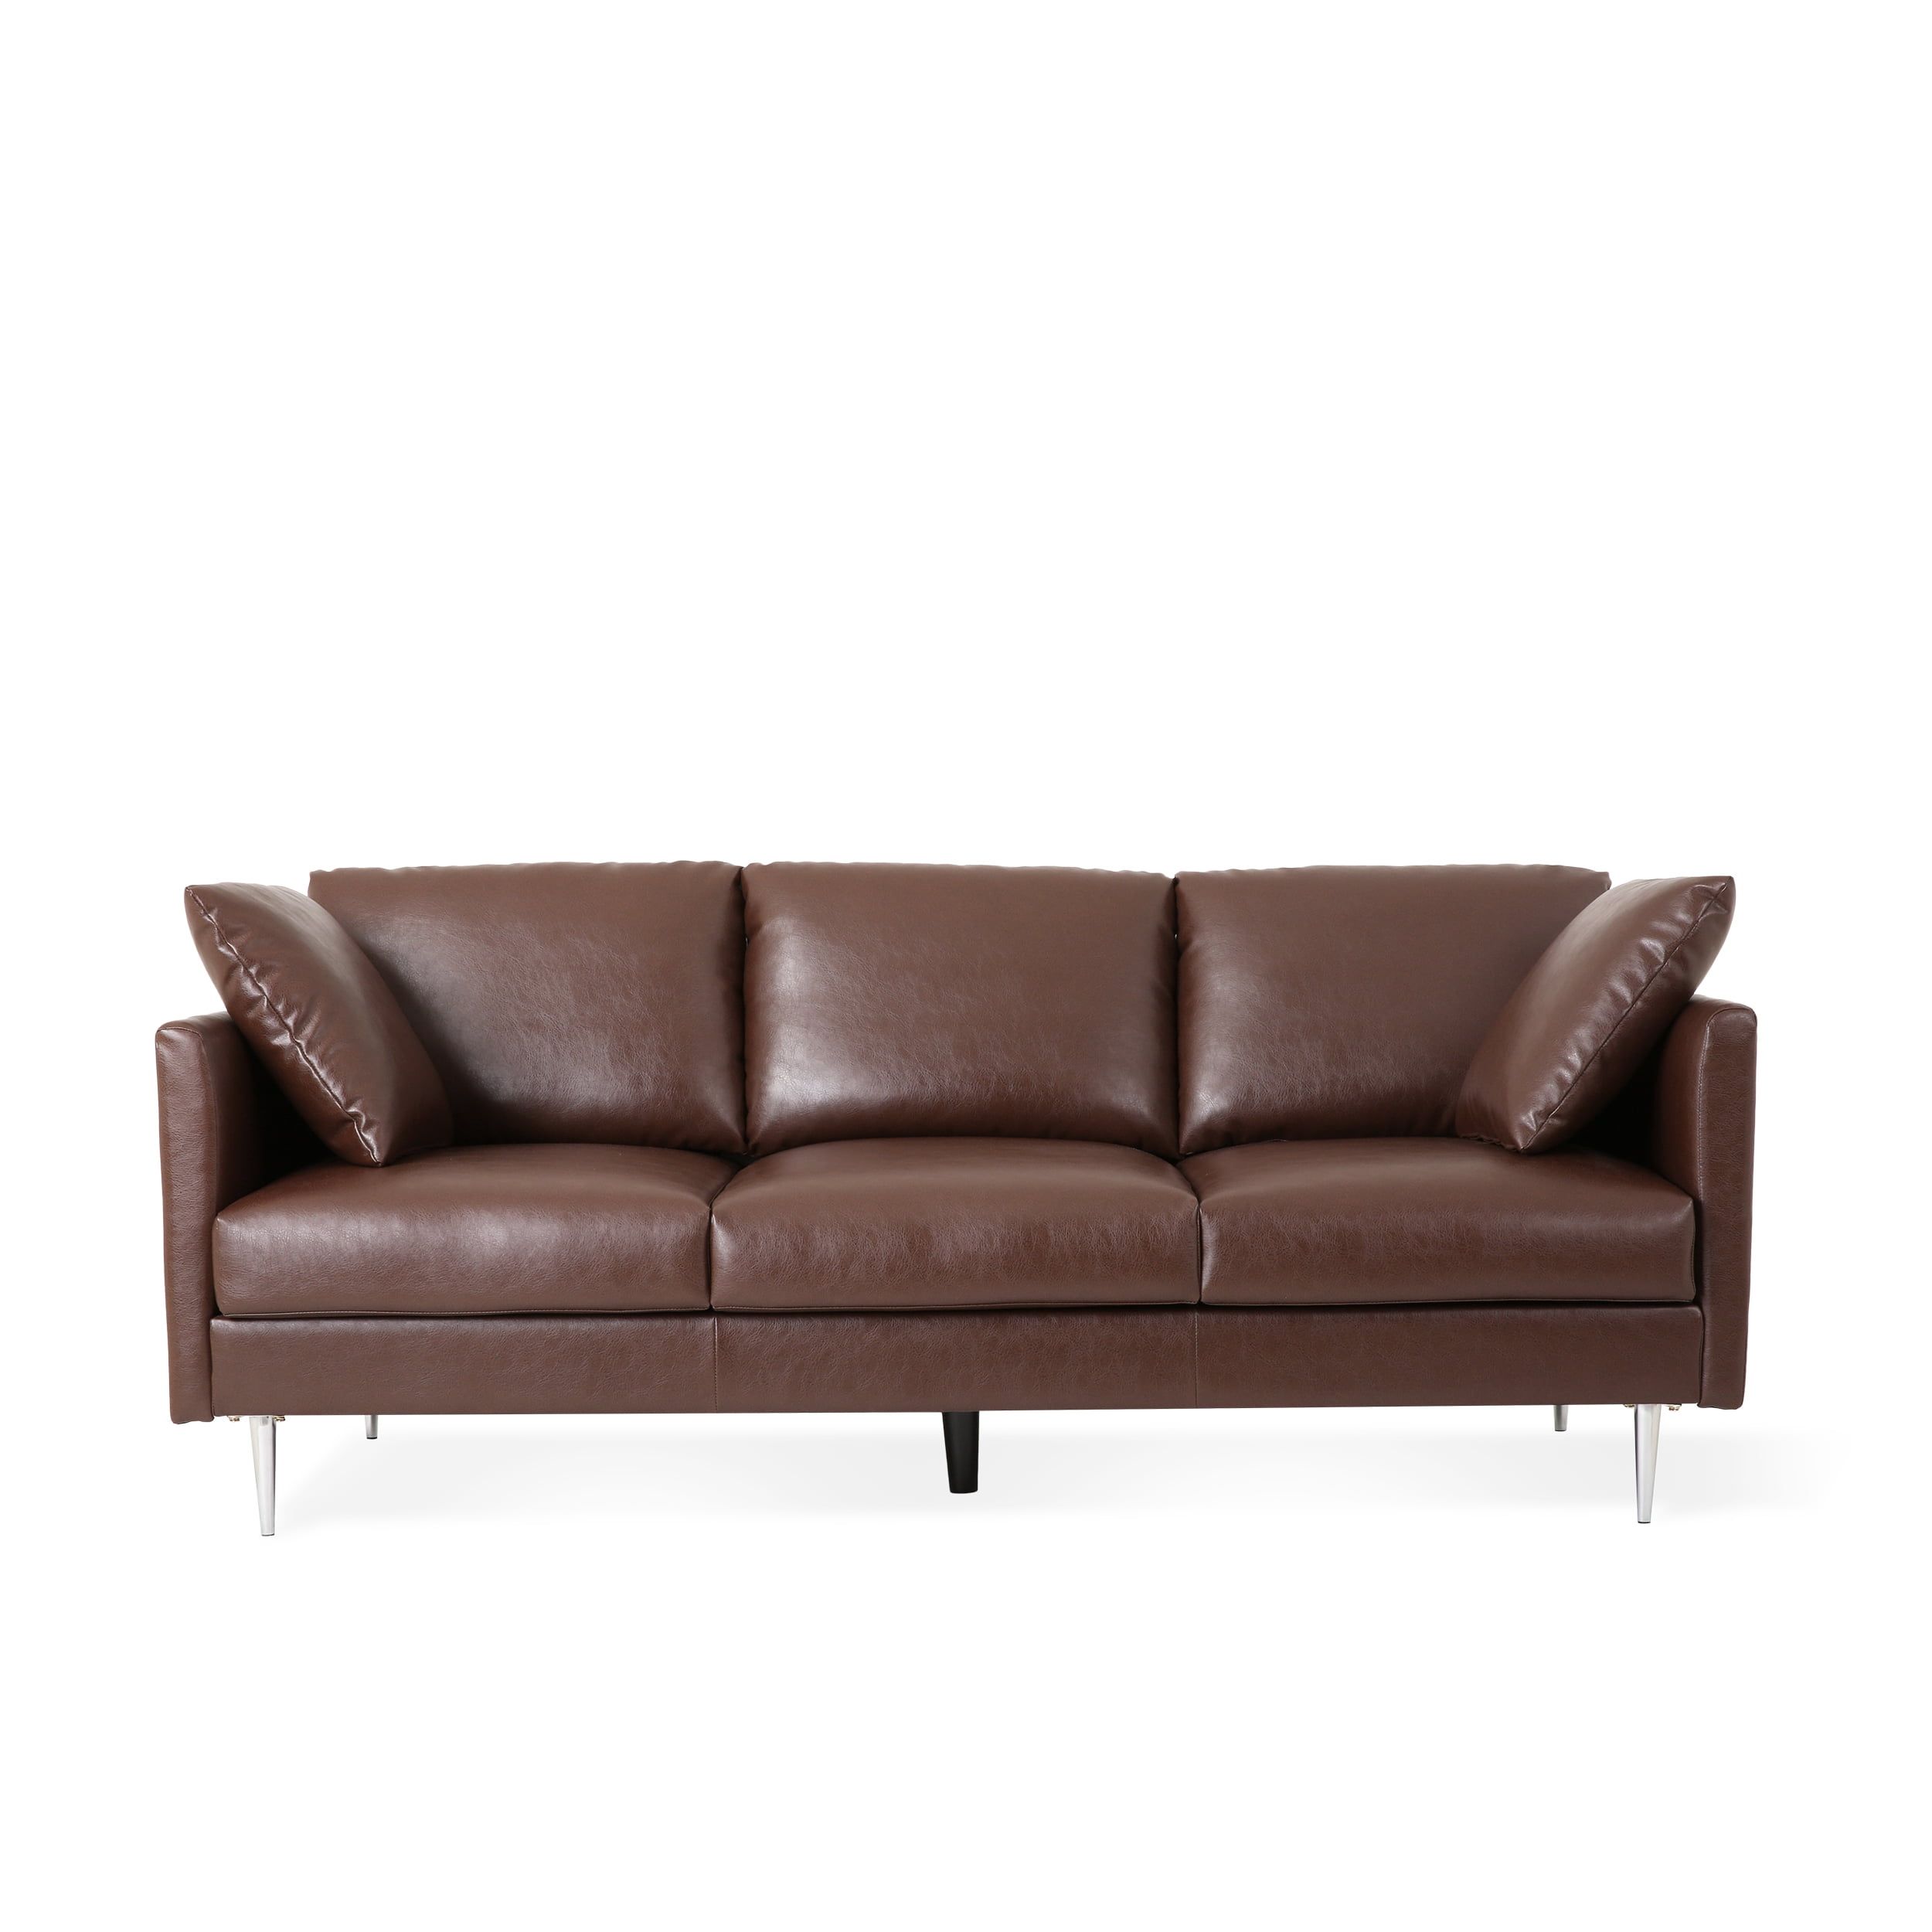 Syosset Modern Faux Leather 3 Seater Sofa With Pillows, Dark Brown And  Silver – Walmart With Regard To Faux Leather Sofas In Dark Brown (View 3 of 15)